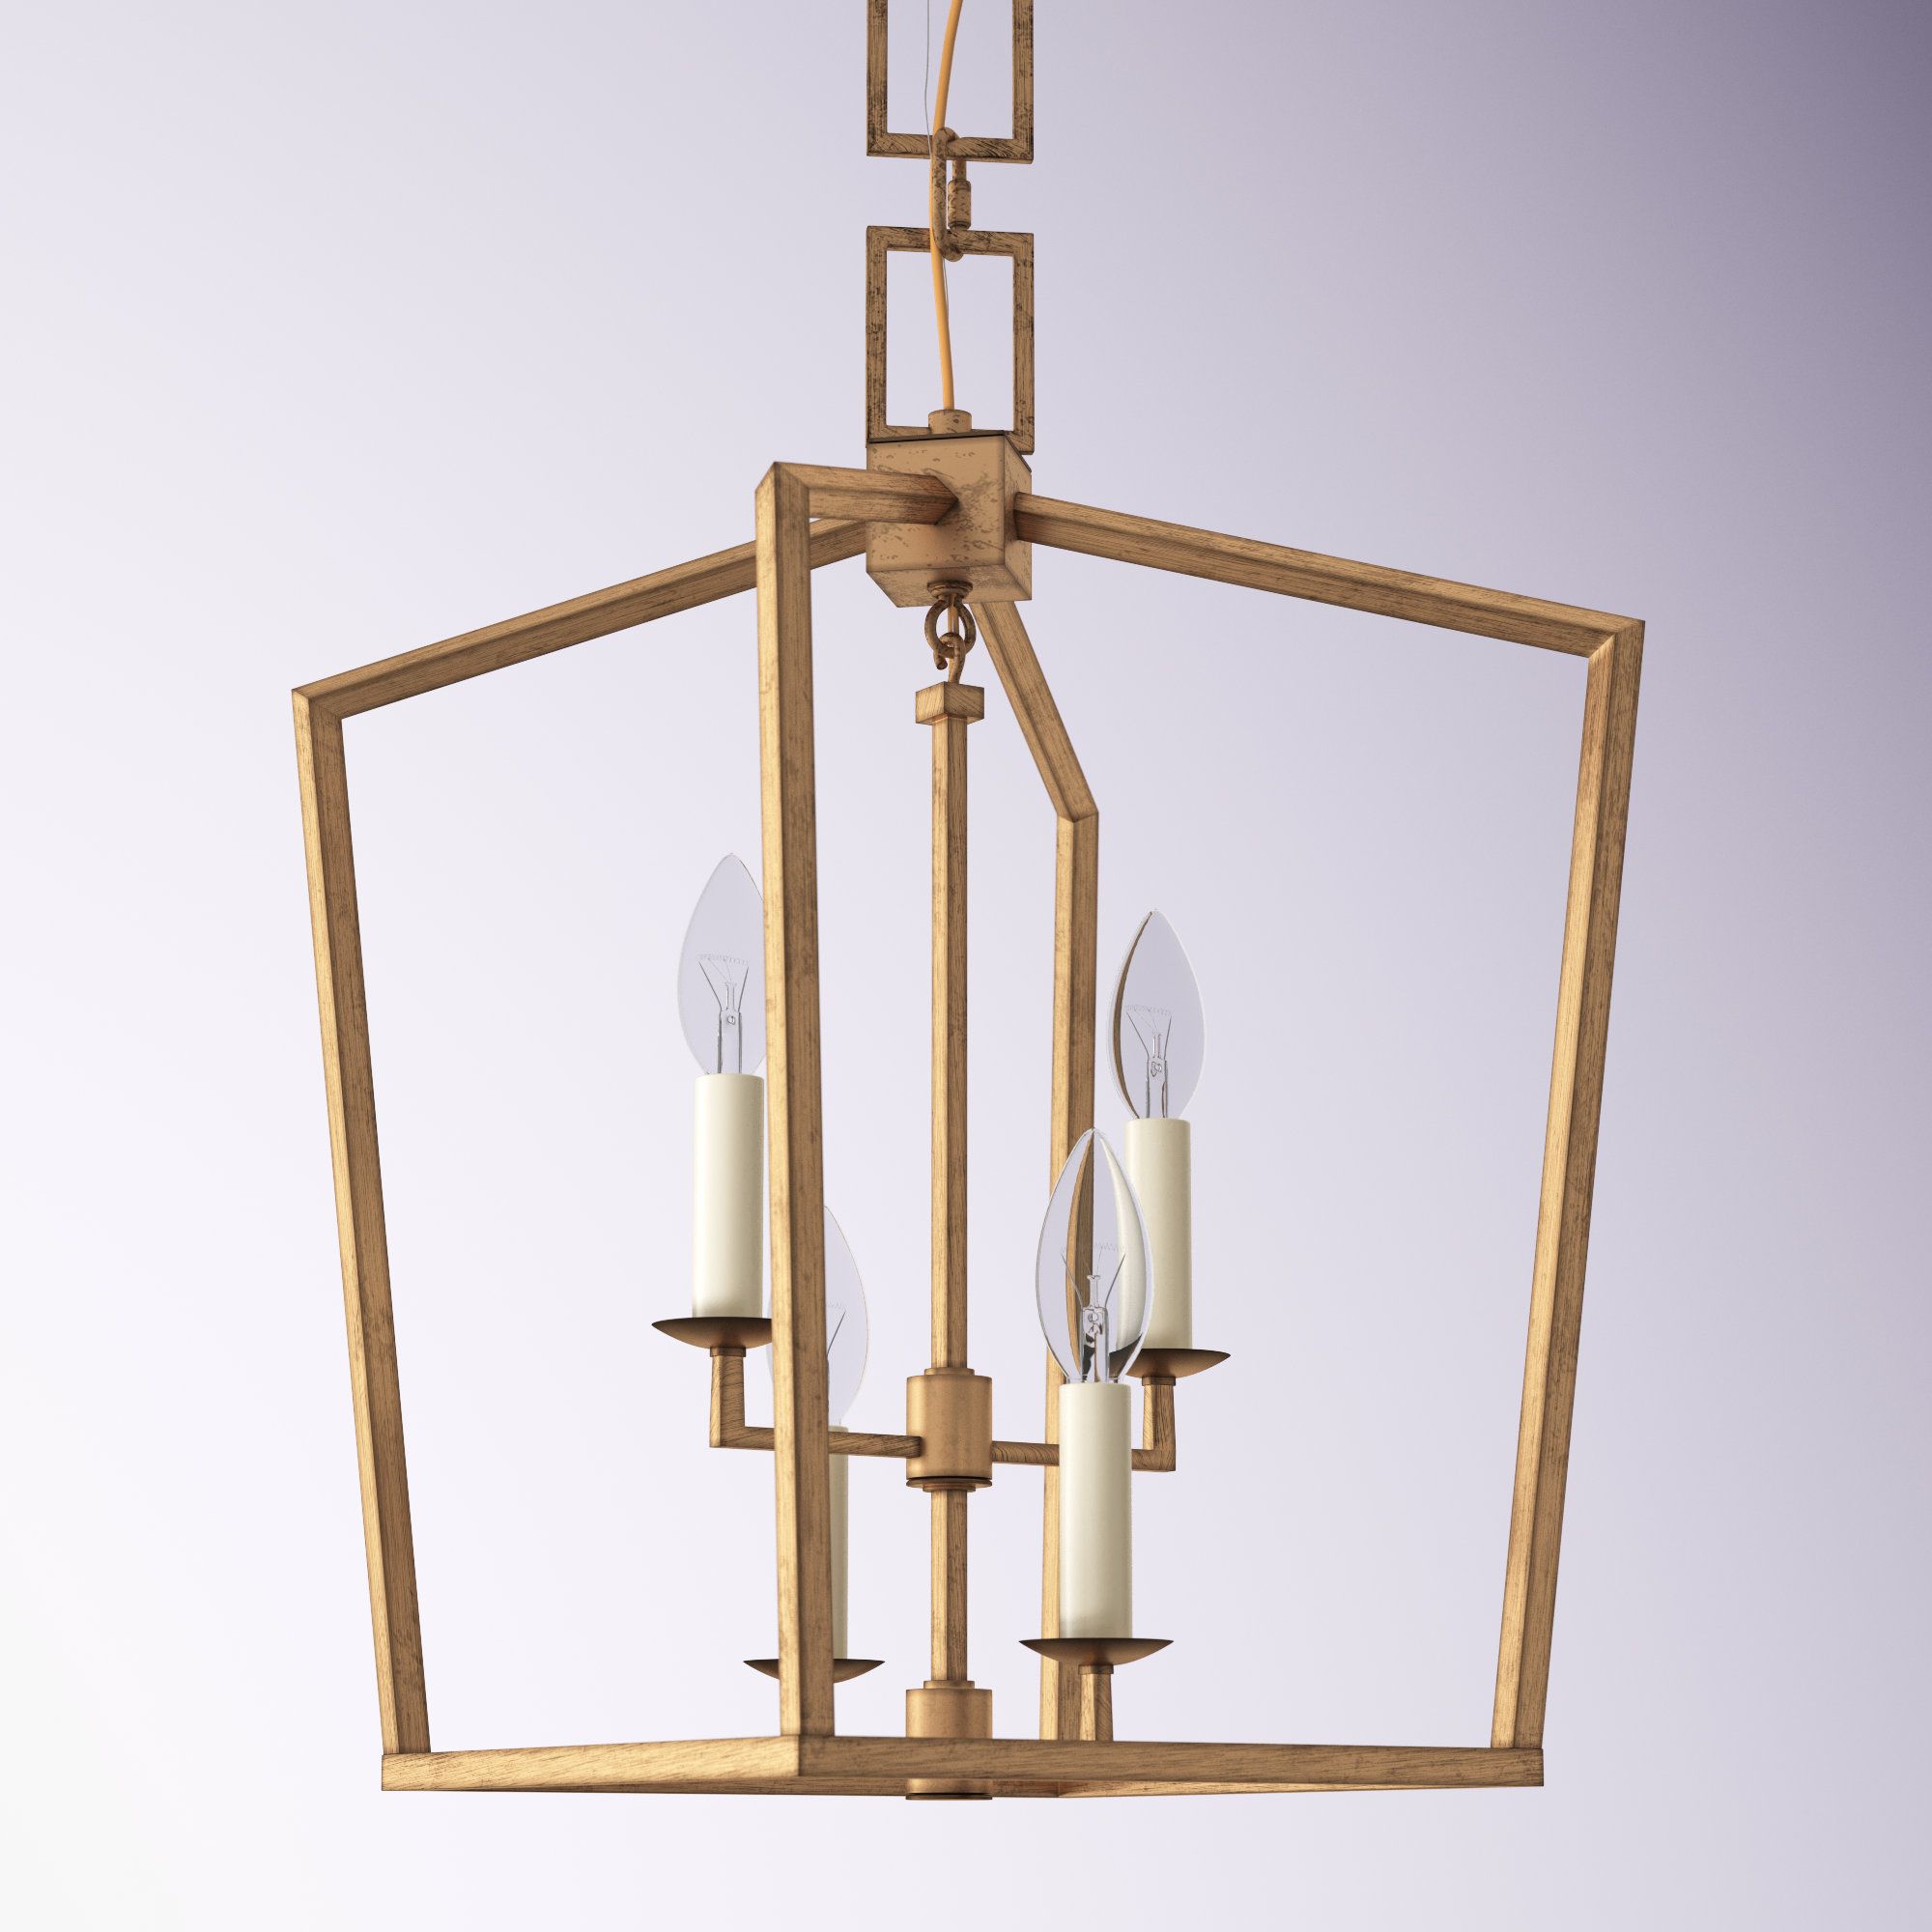 Foyer Large ( 17" – 29" Wide) Pendant Lighting You'll Love In  (View 9 of 10)